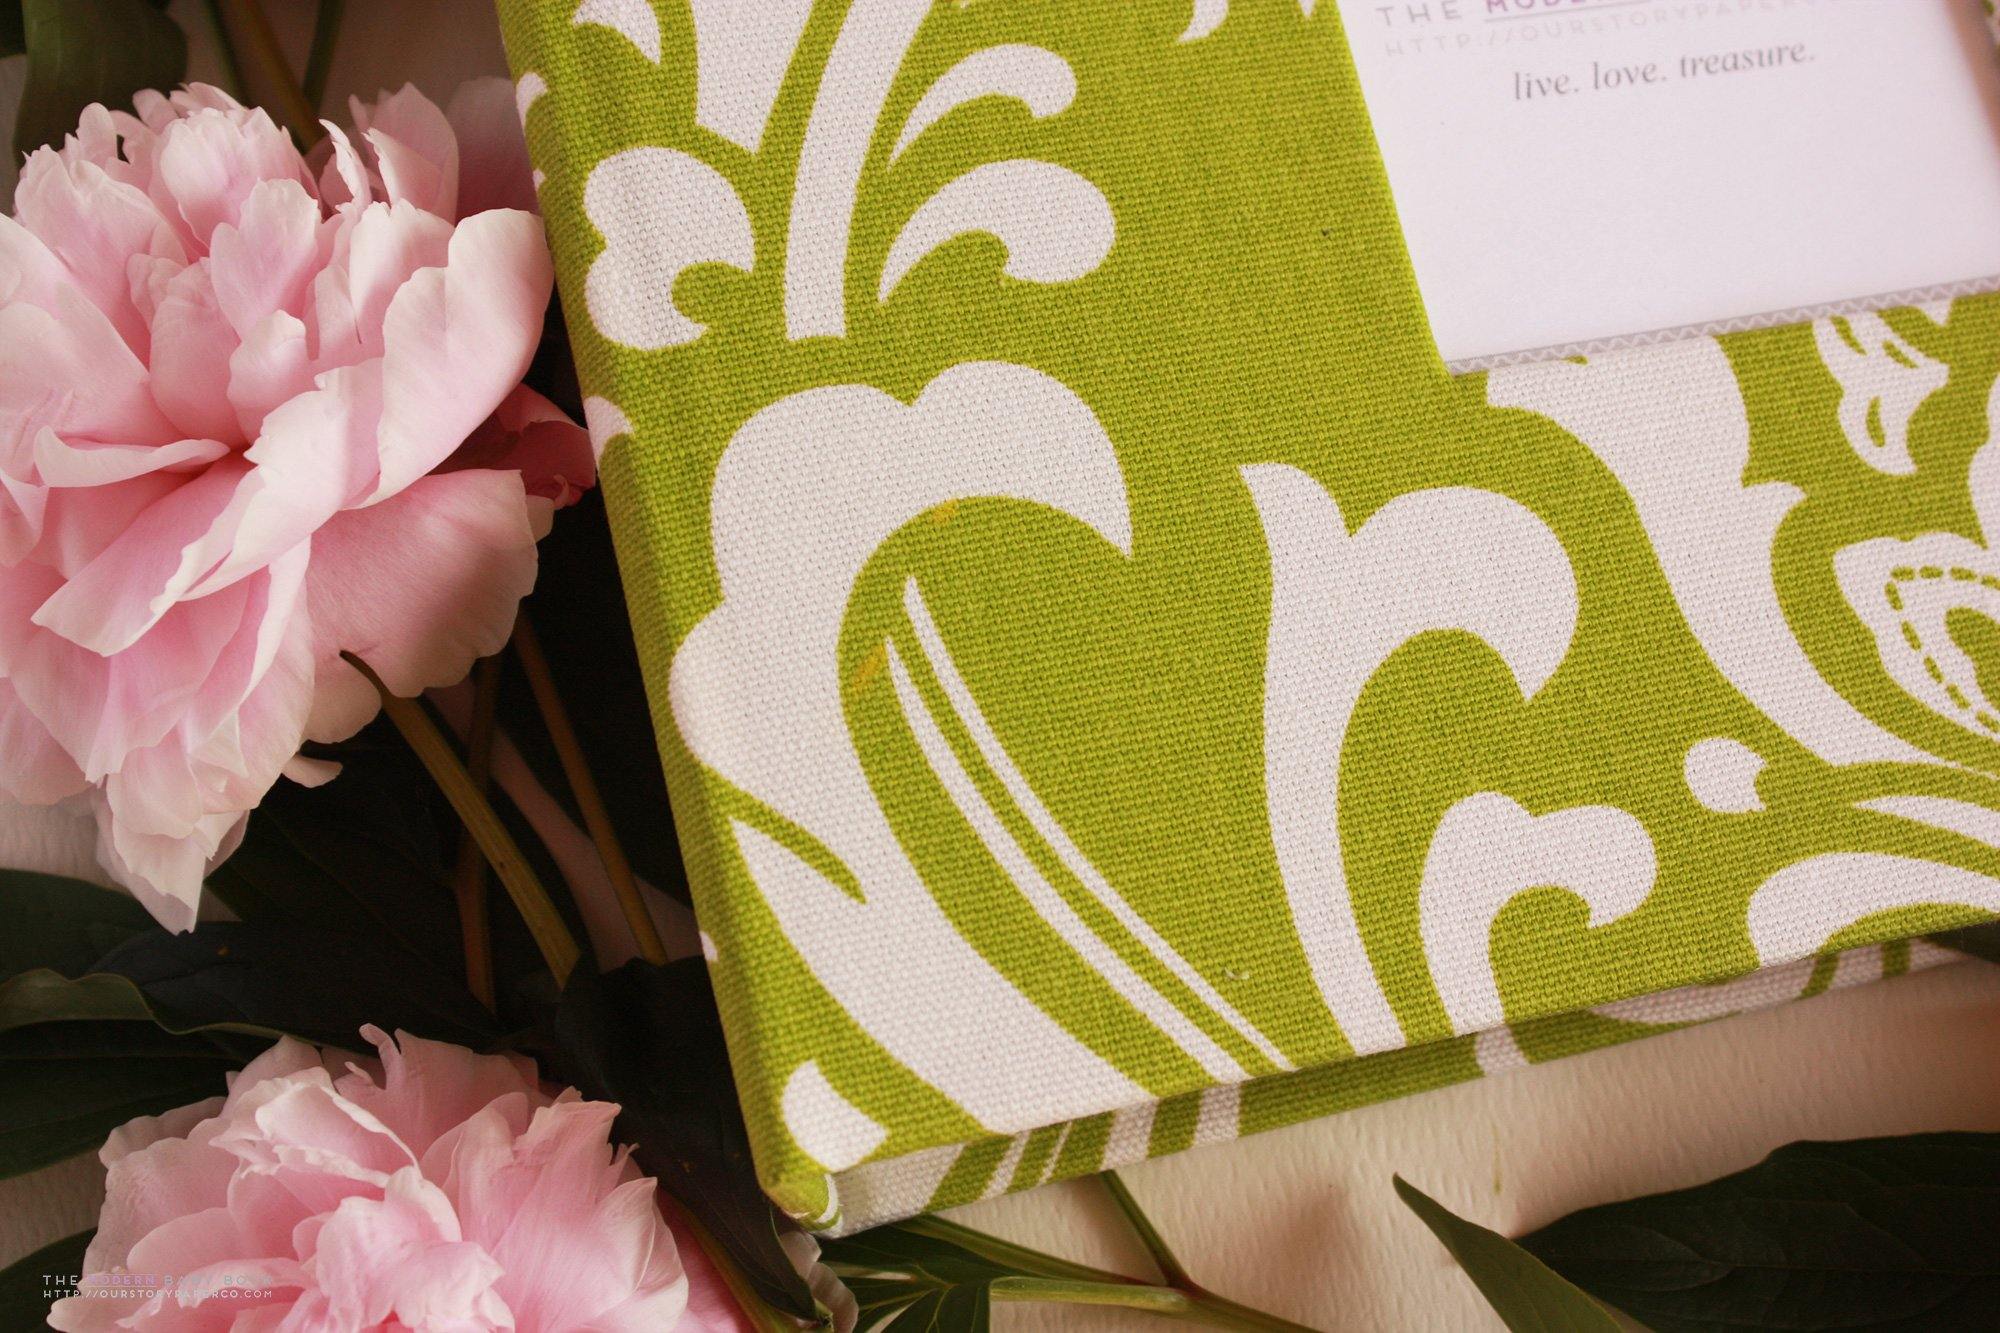 Green Damask Modern Baby Book - Our Story Paper Co.